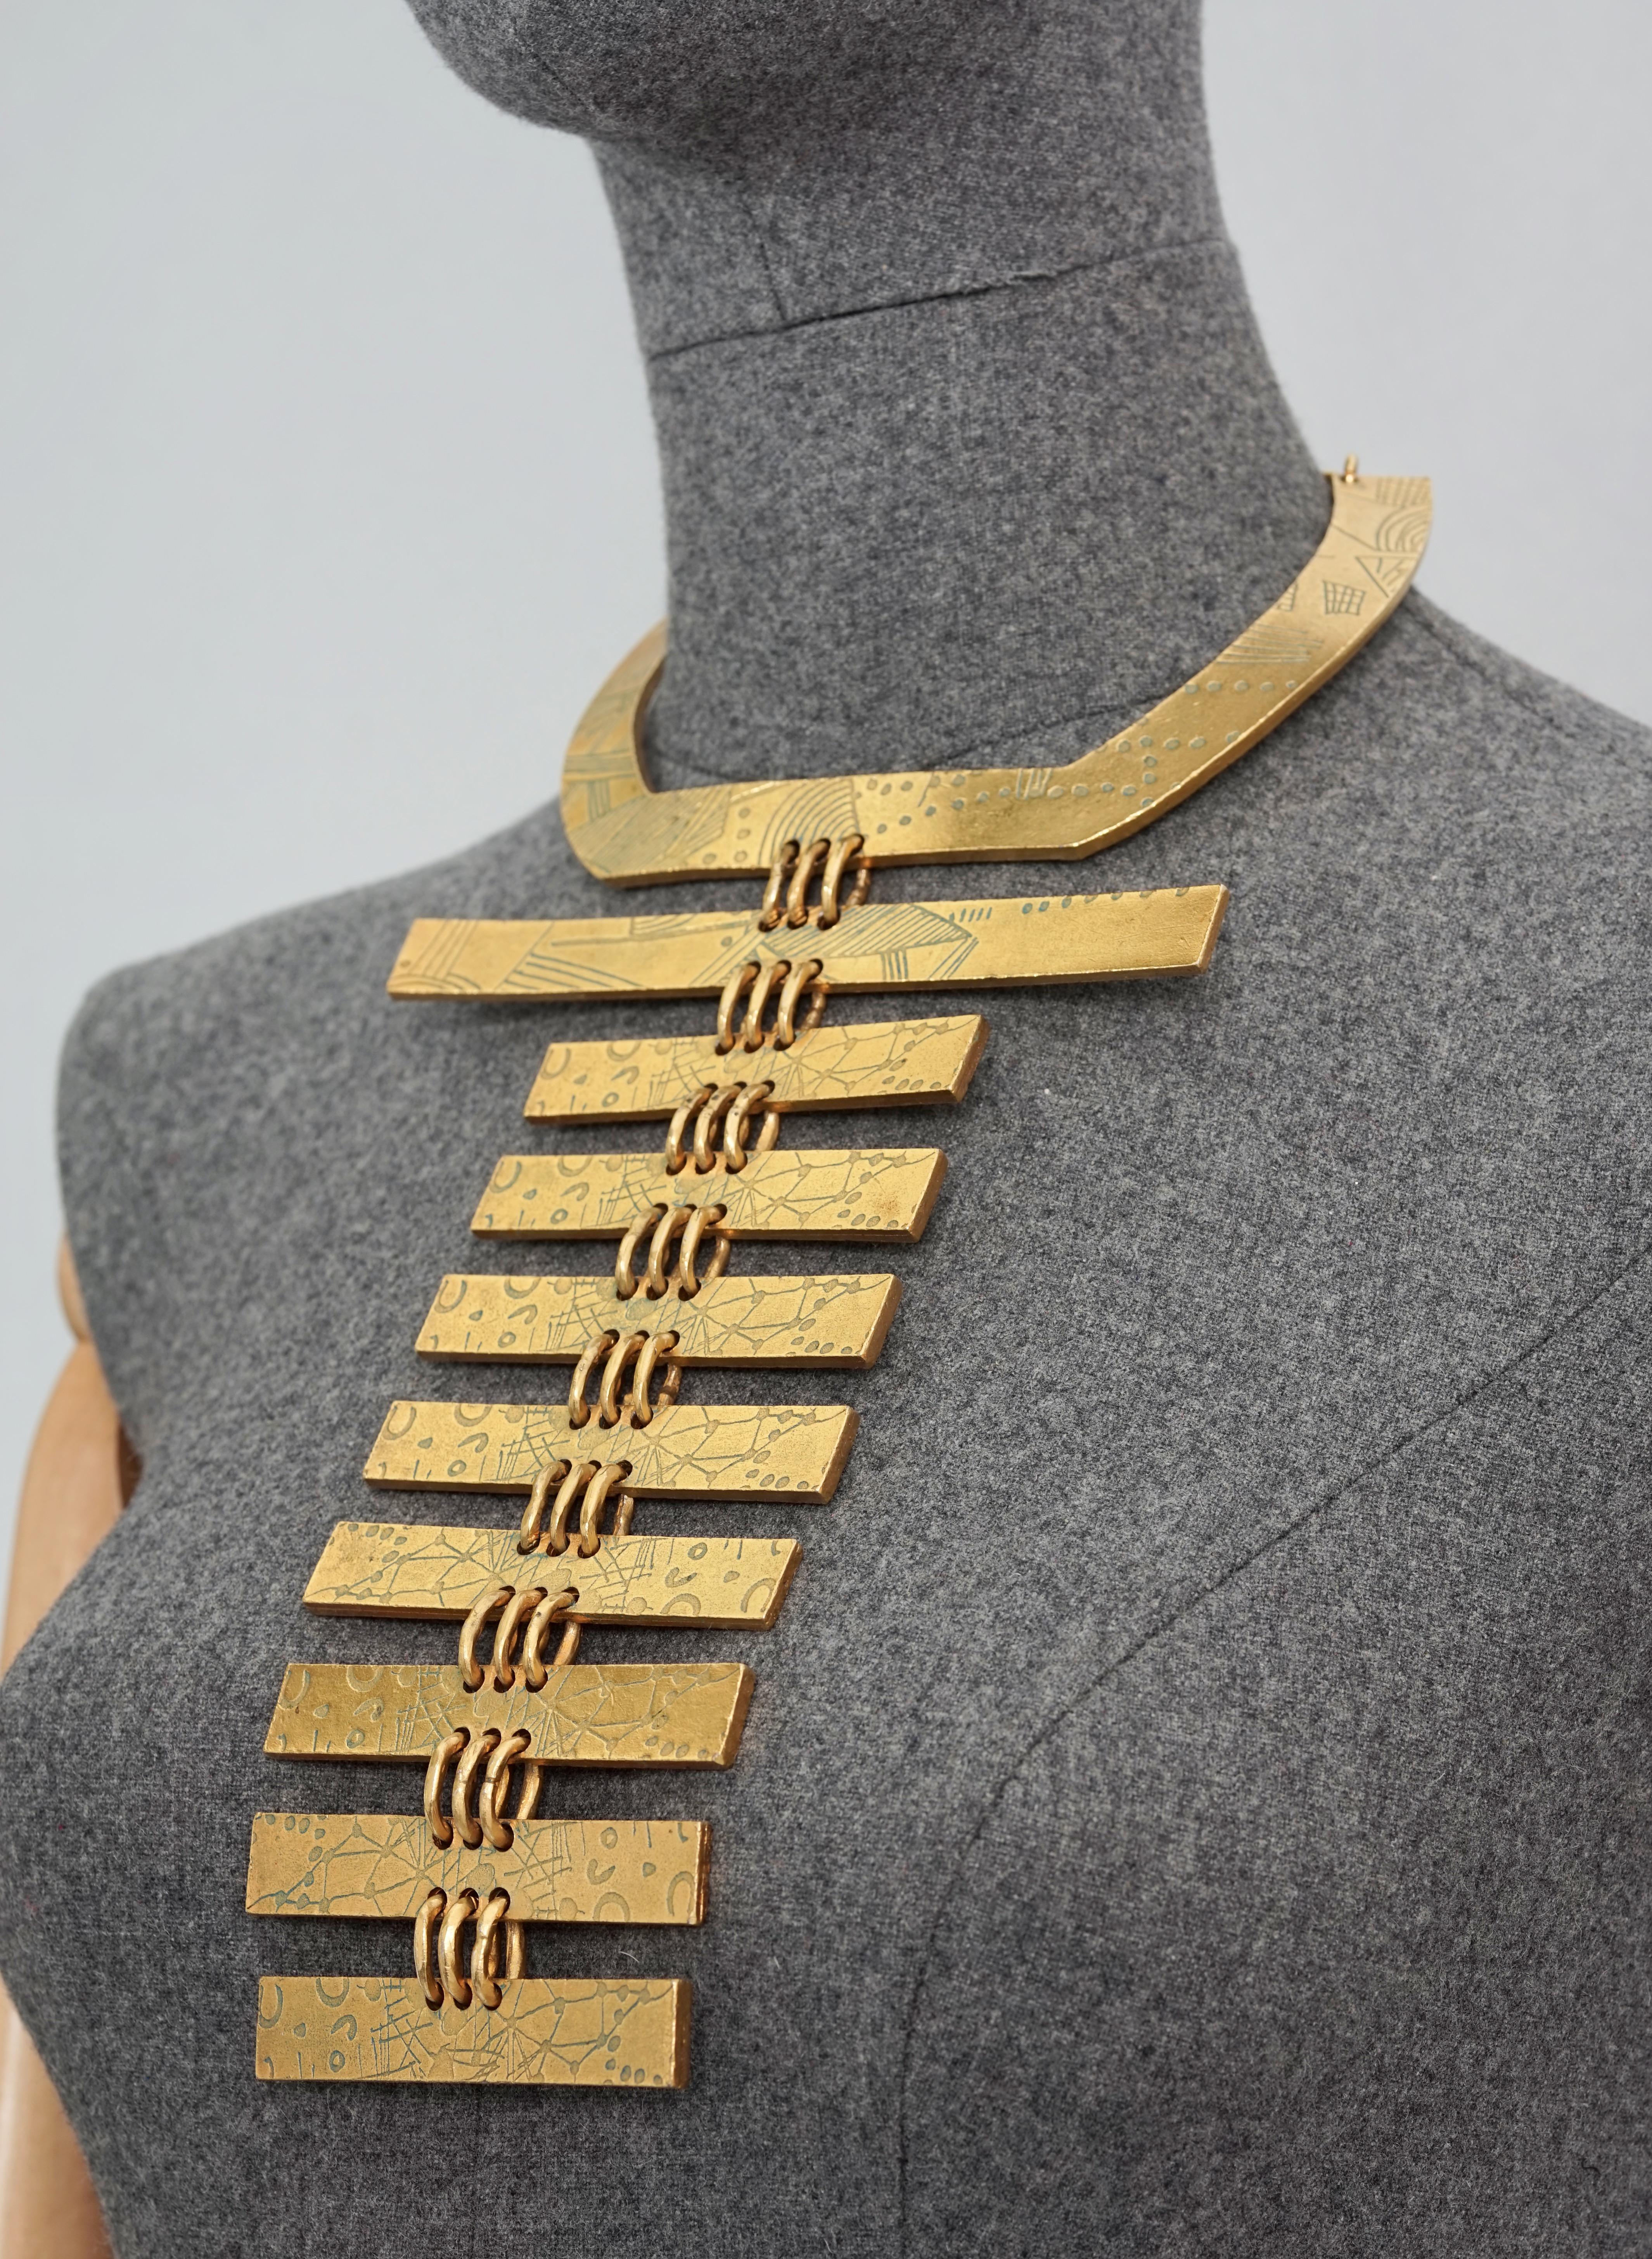 Vintage Massive BICHE DE BERE Engraved Breast Plate Plastron Necklace
Limited edition. 
This is the 19th out of 289 pieces.

Measurements:
Height: 8.26 inches (21 cm)
Wearable Length: 13.97 inches (35.5 cm) max

Features:
- 100% Authentic BICHE DE